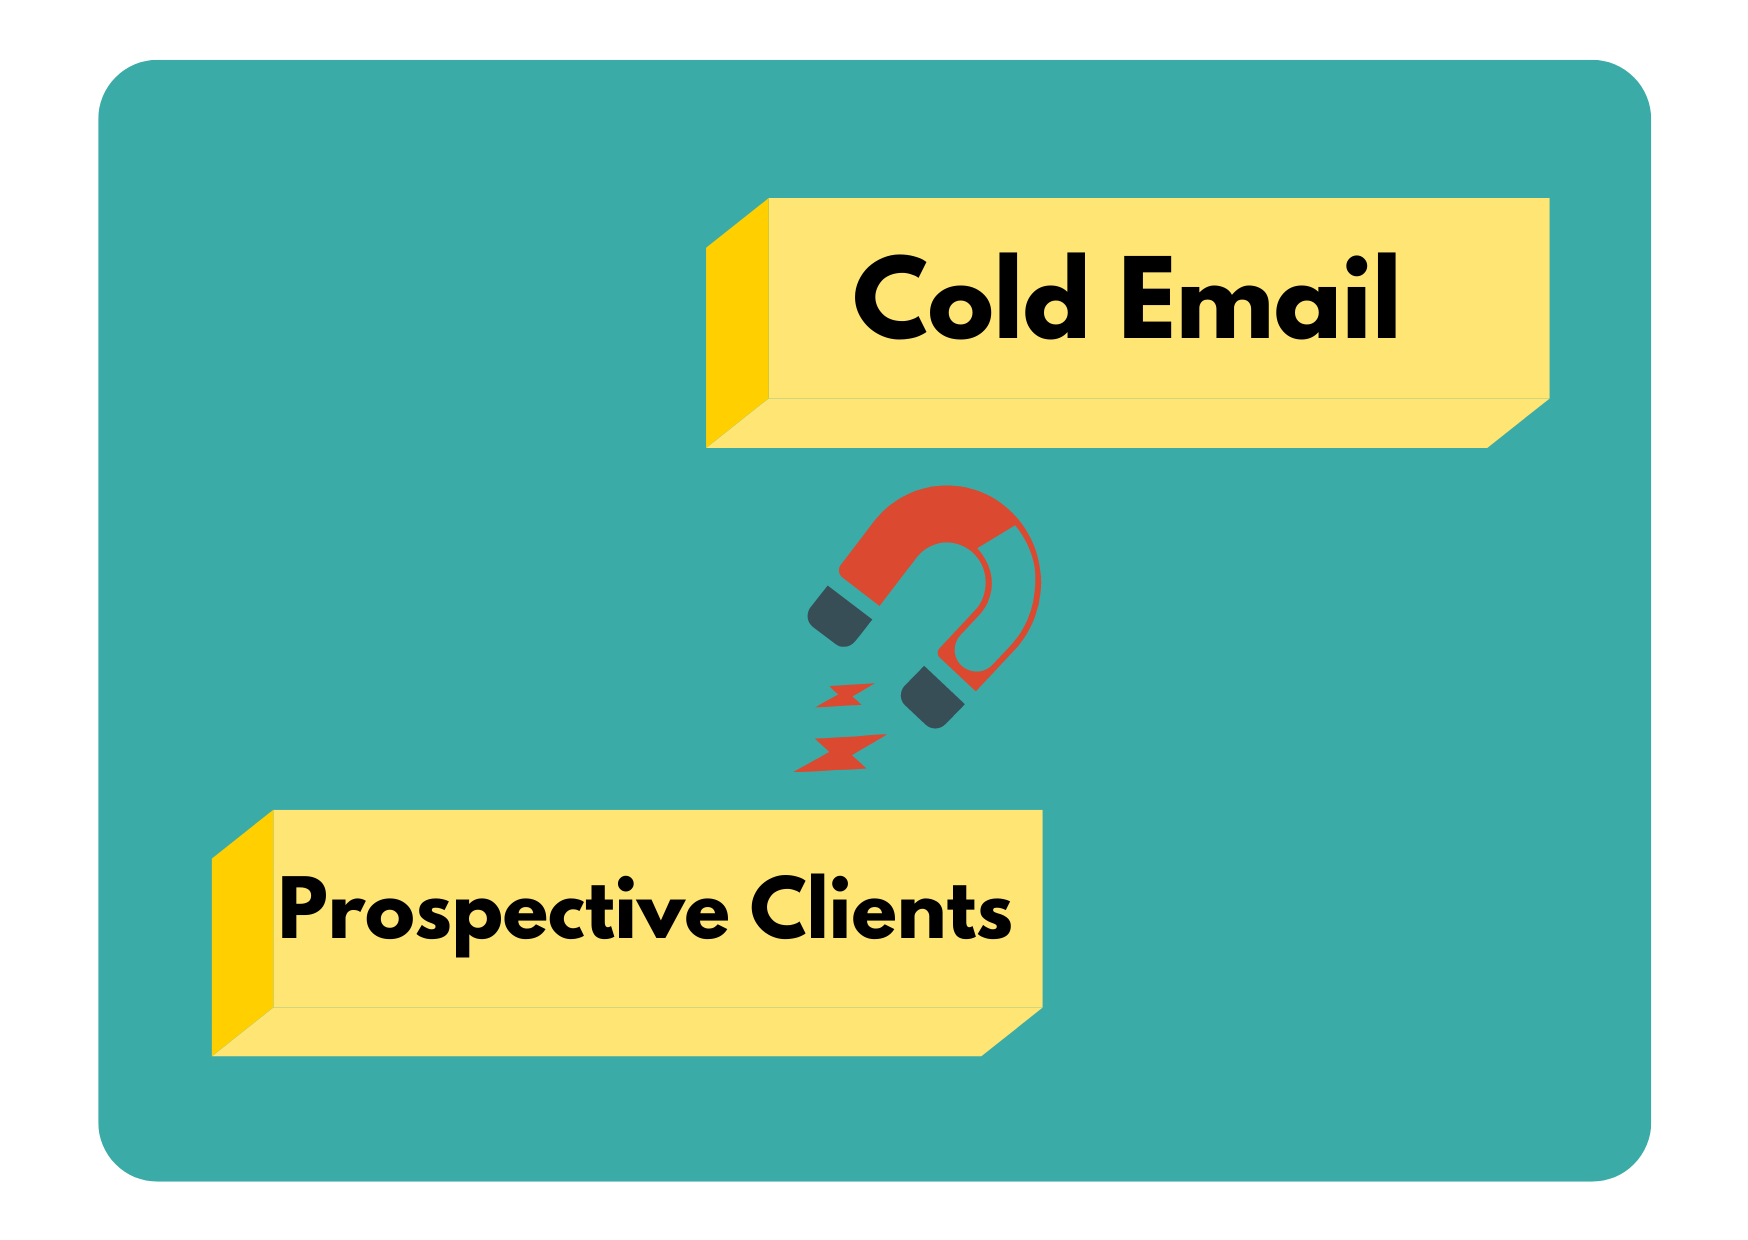 A magnet showing how your business proposal, a cold email attracts prospective clients.